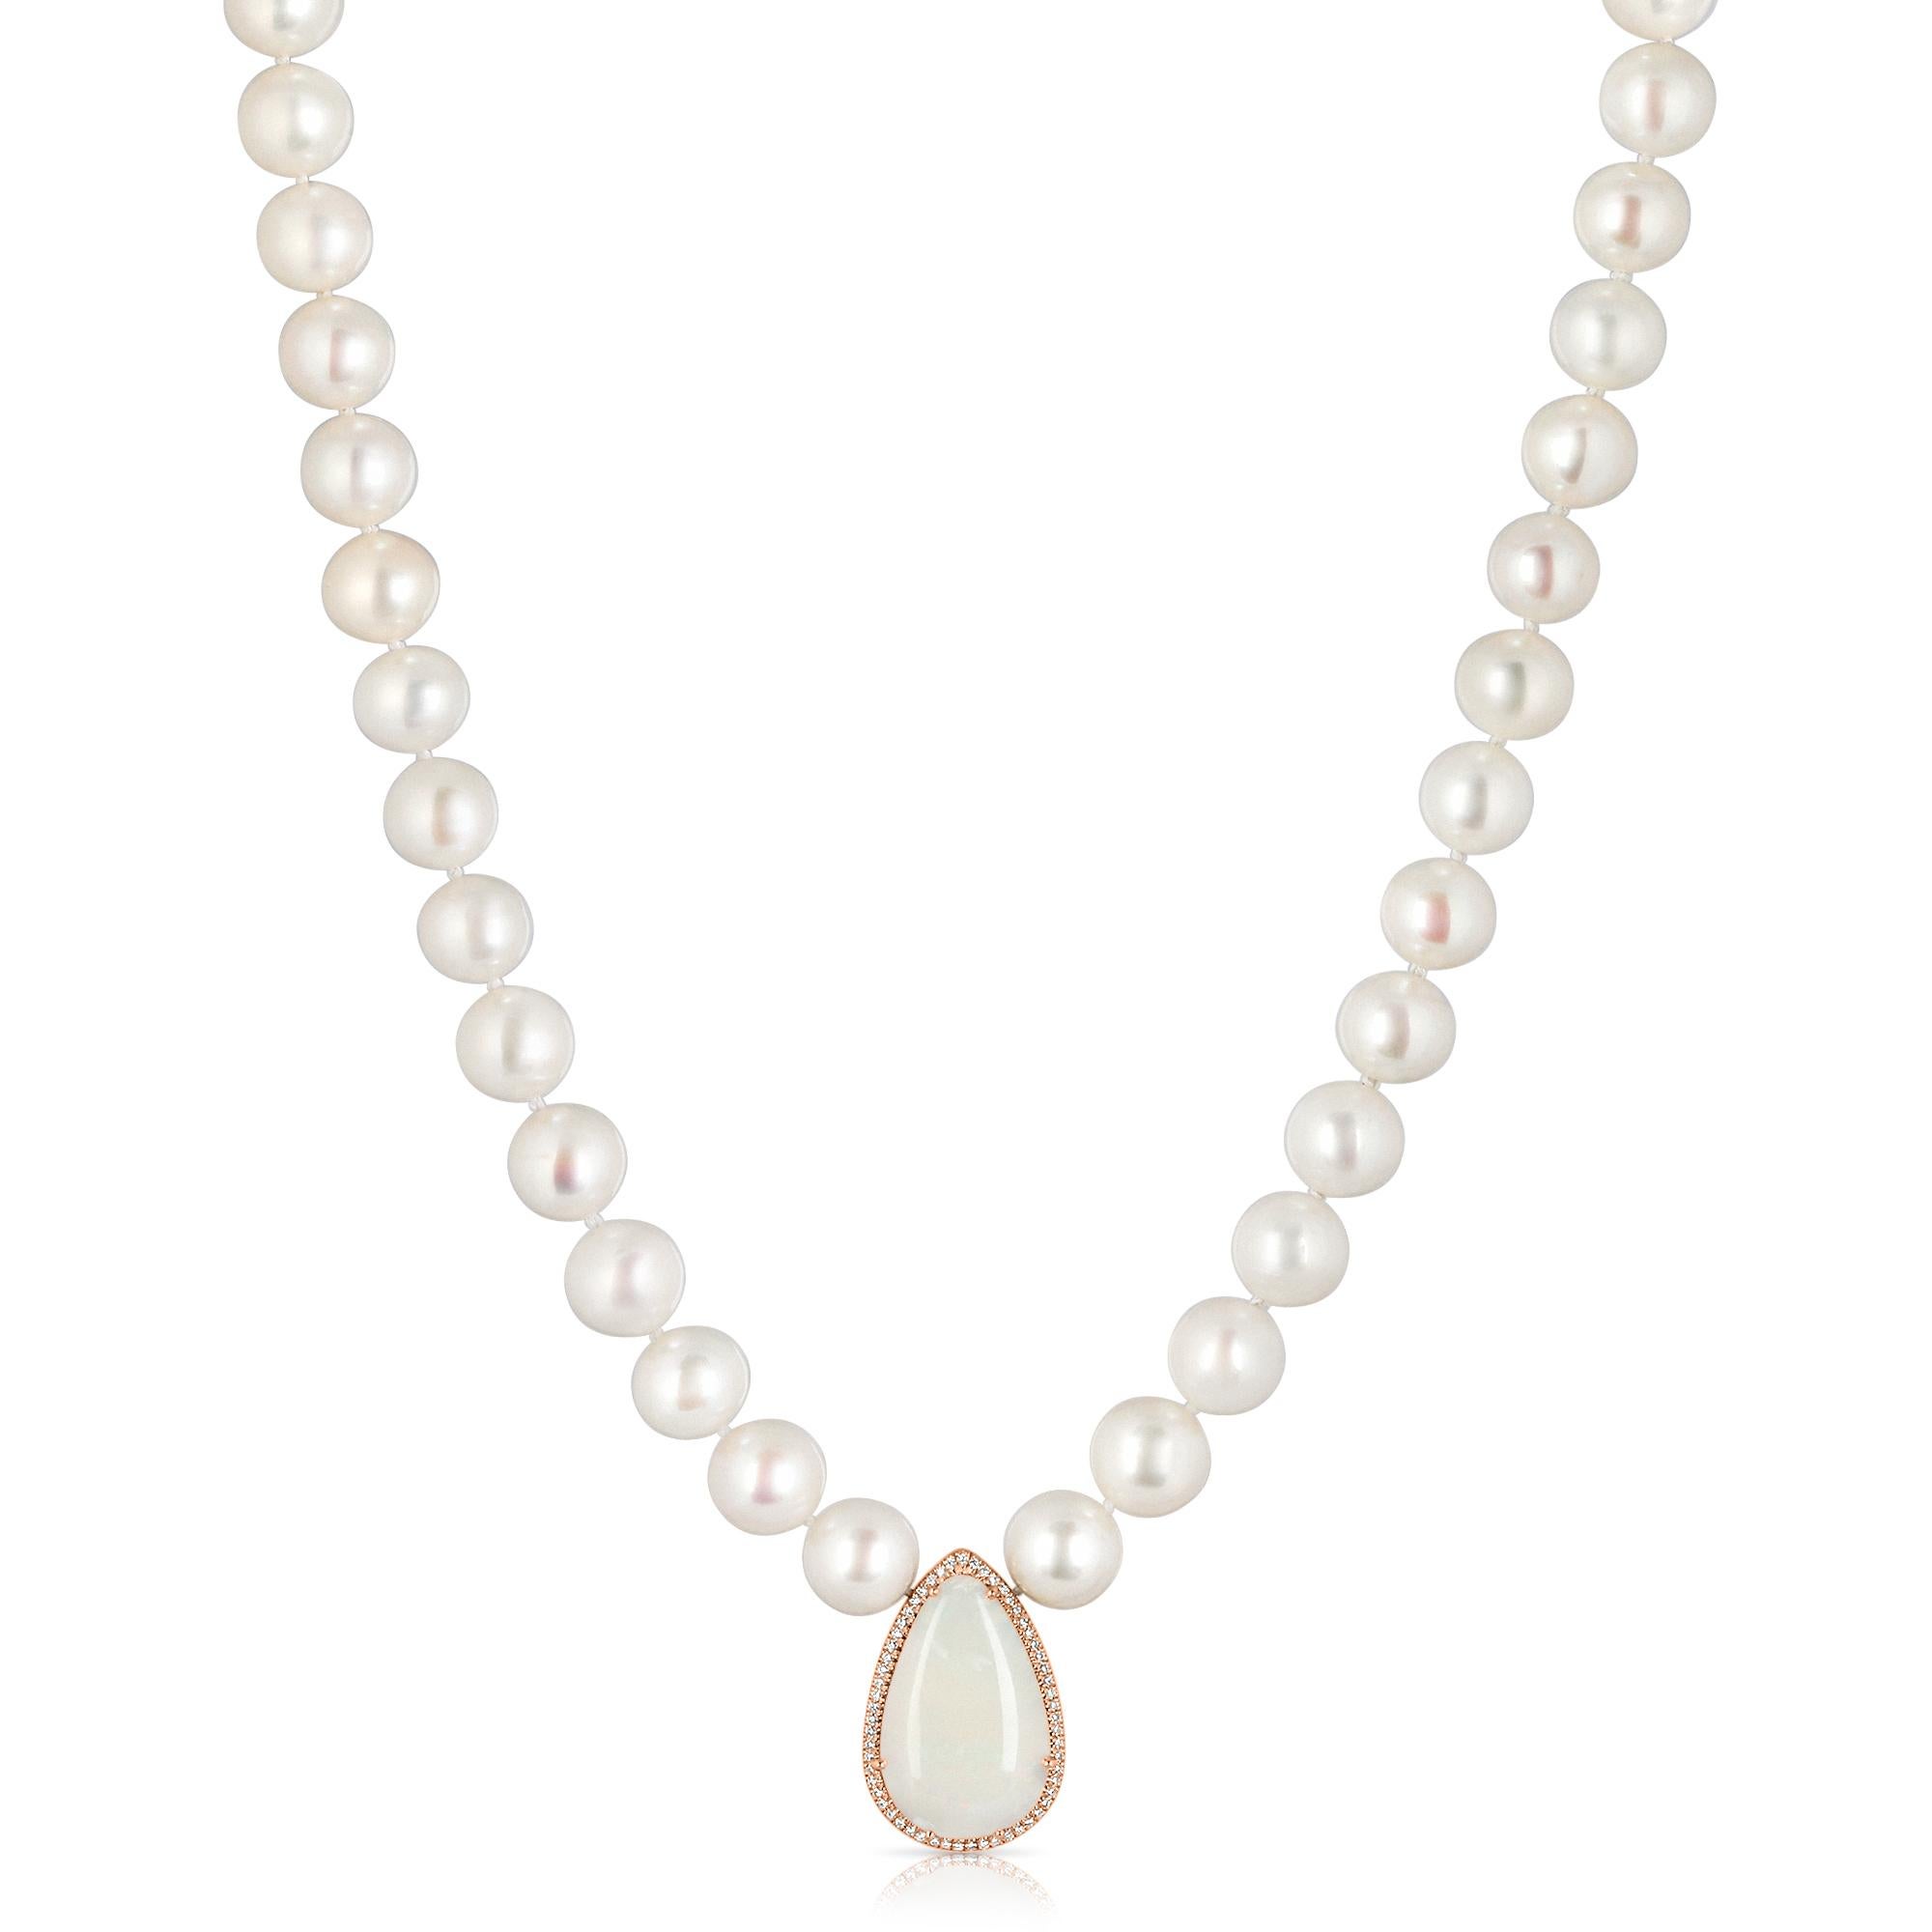 Amazing necklace set with 10 mm pearls, the main stone is a 6.03 carat pear shaped opal and brilliant round diamonds total weight 0.25 carat

